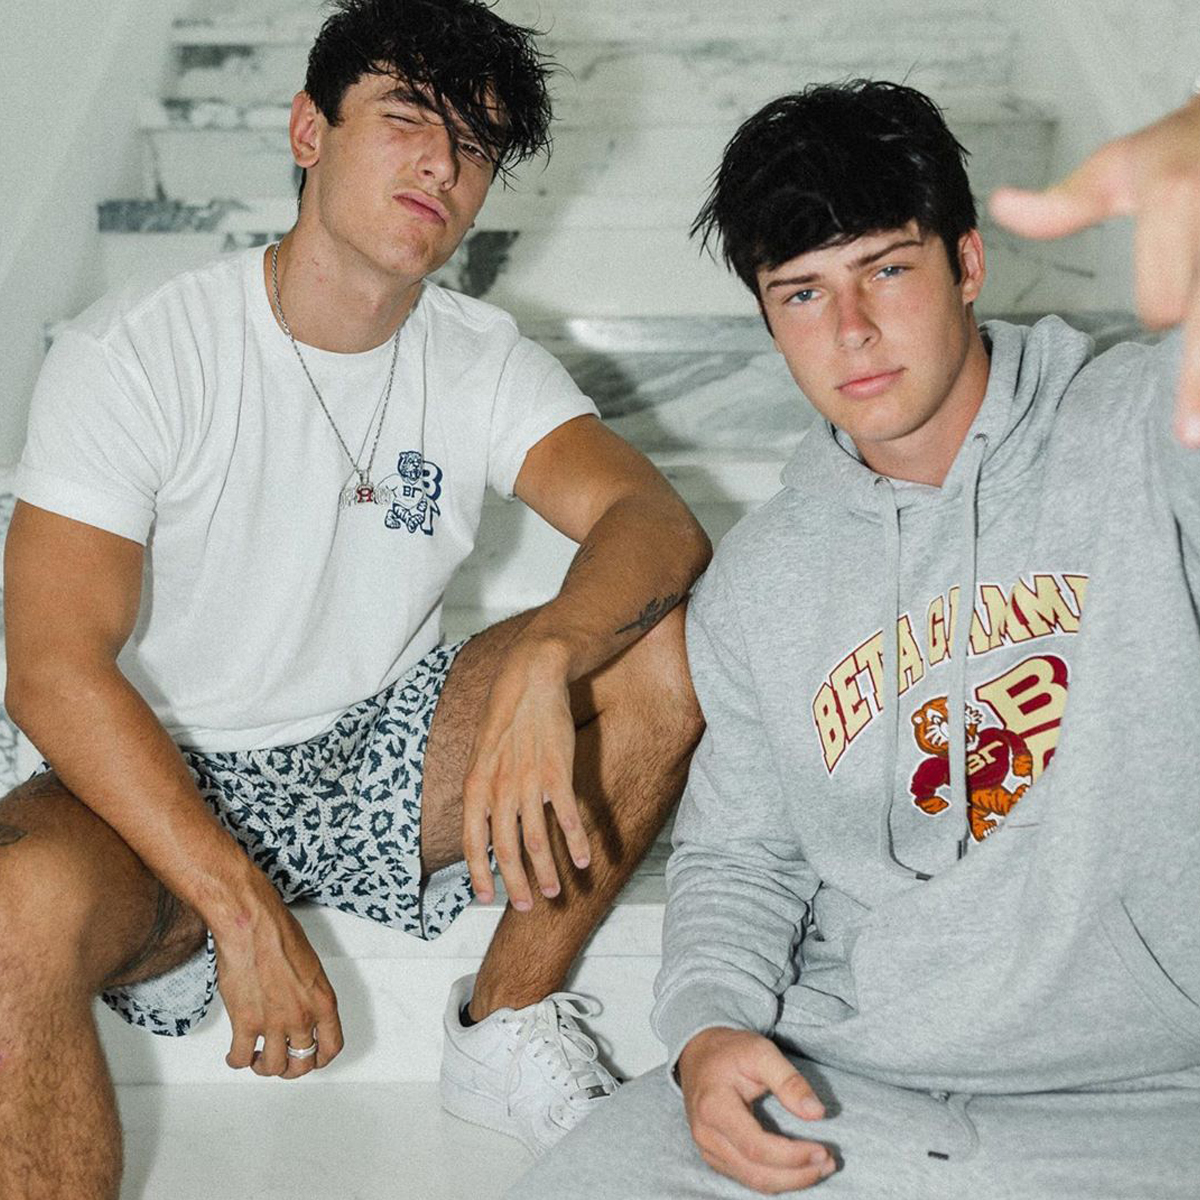 Tiktok Stars Bryce Hall And Blake Gray Charged For Pandemic Party E 